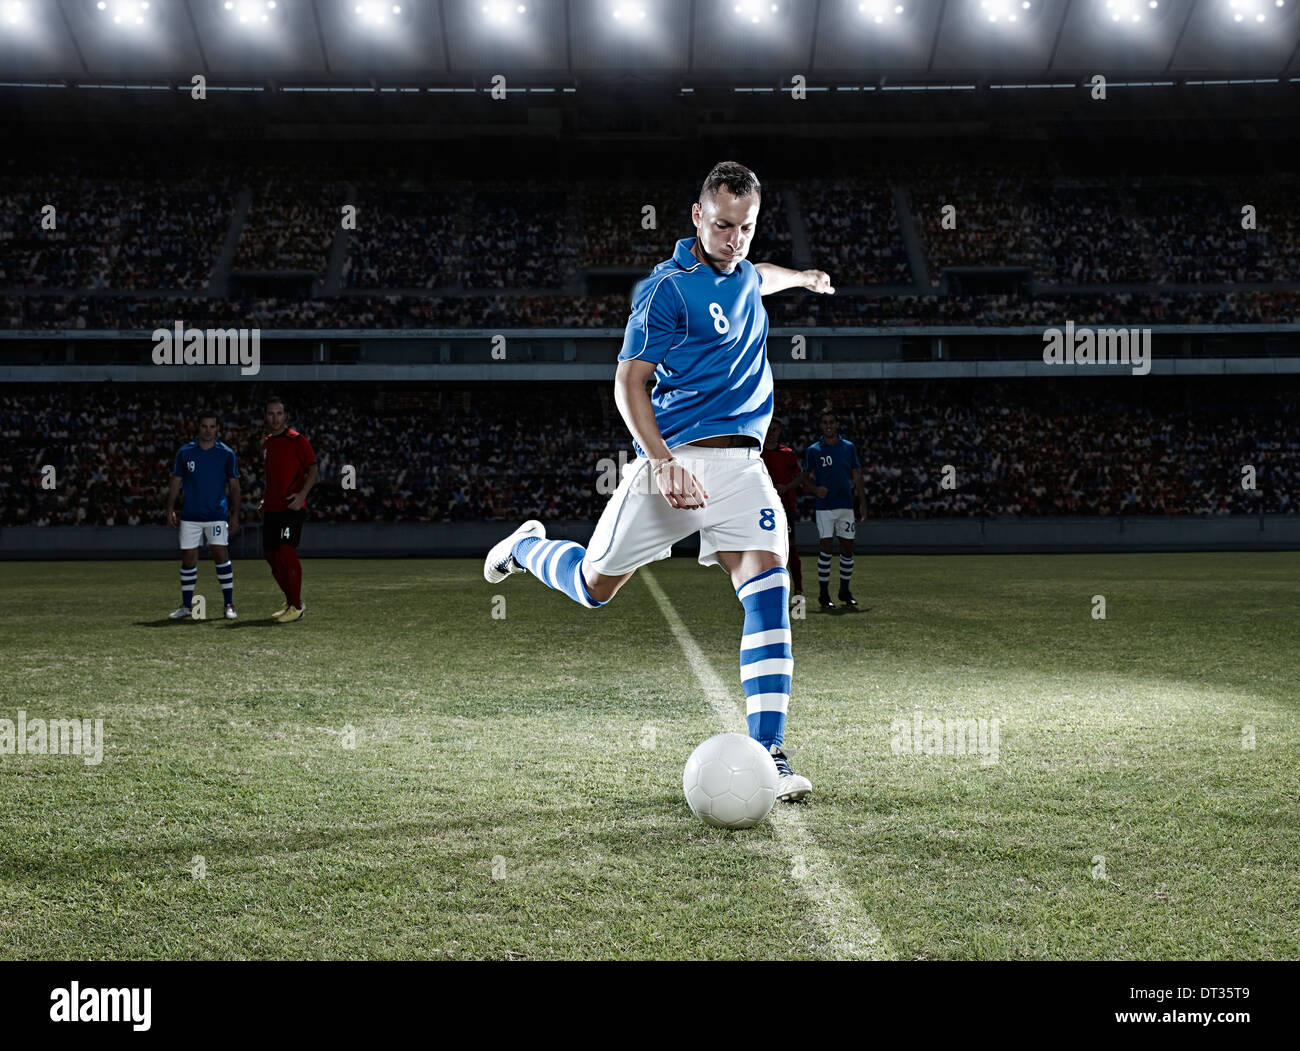 Soccer player kicking ball on field Banque D'Images